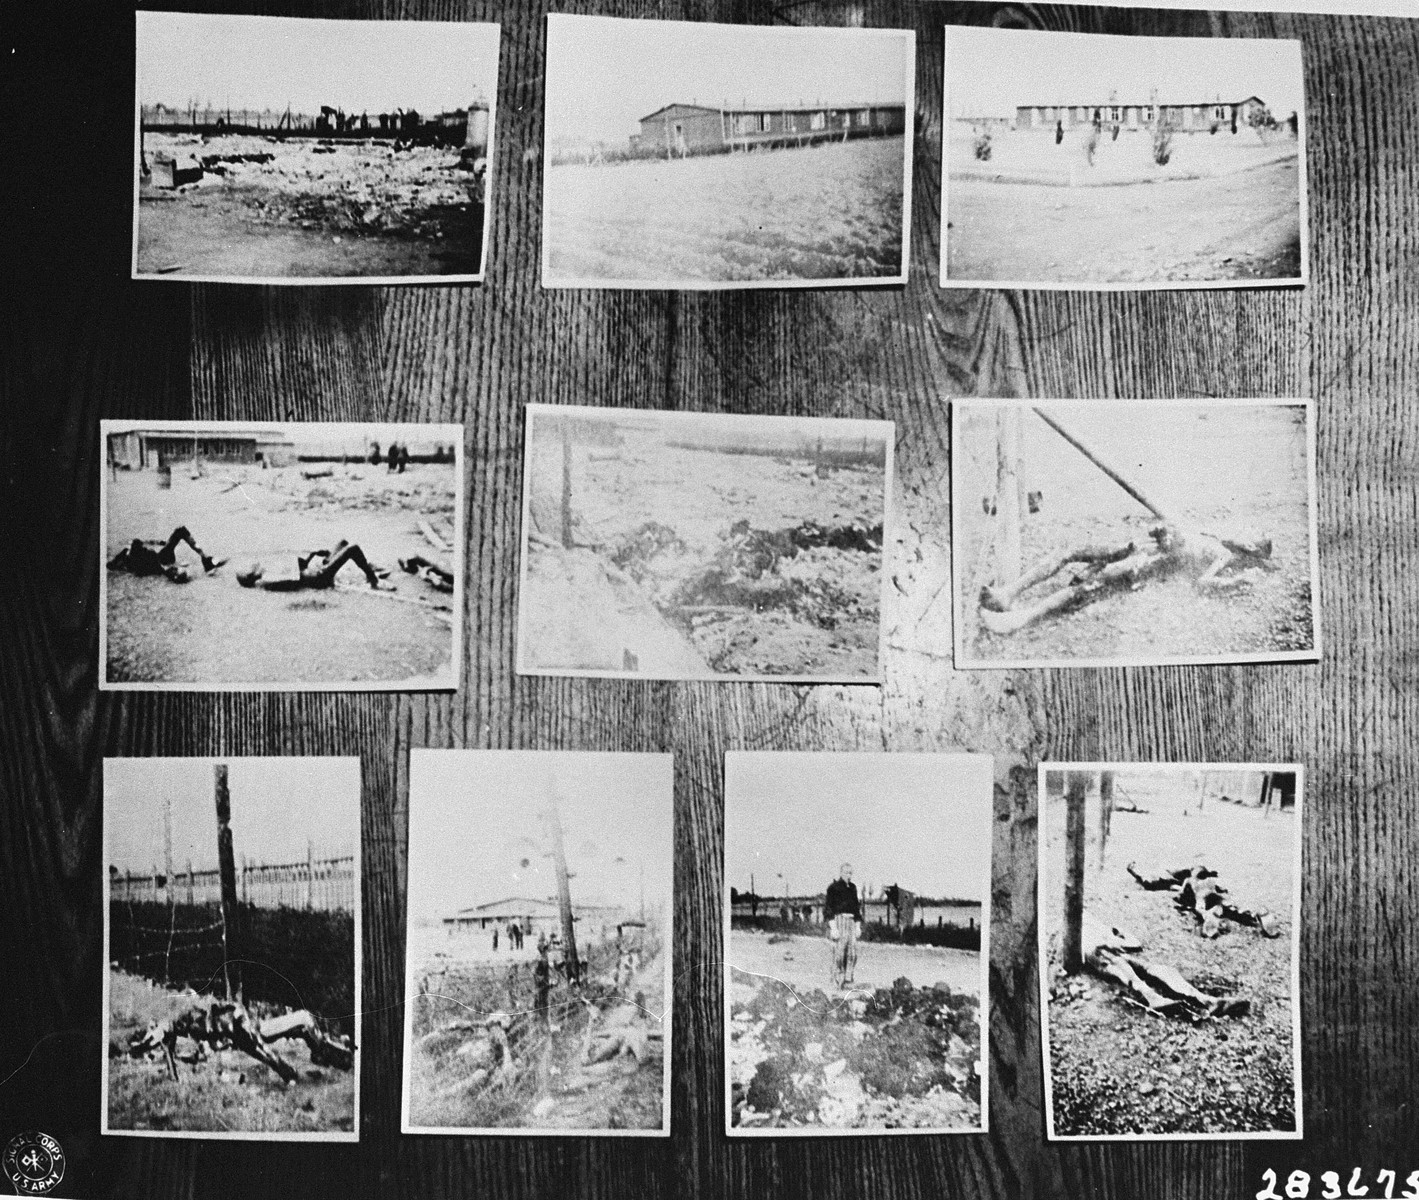 Photographic evidence of atrocities committed in the Buchenwald sub-camp of Leipzig-Thekla, submitted for the prosecution by Dr. Ernest Replat at the trial of former camp personnel and prisoners from Buchenwald.